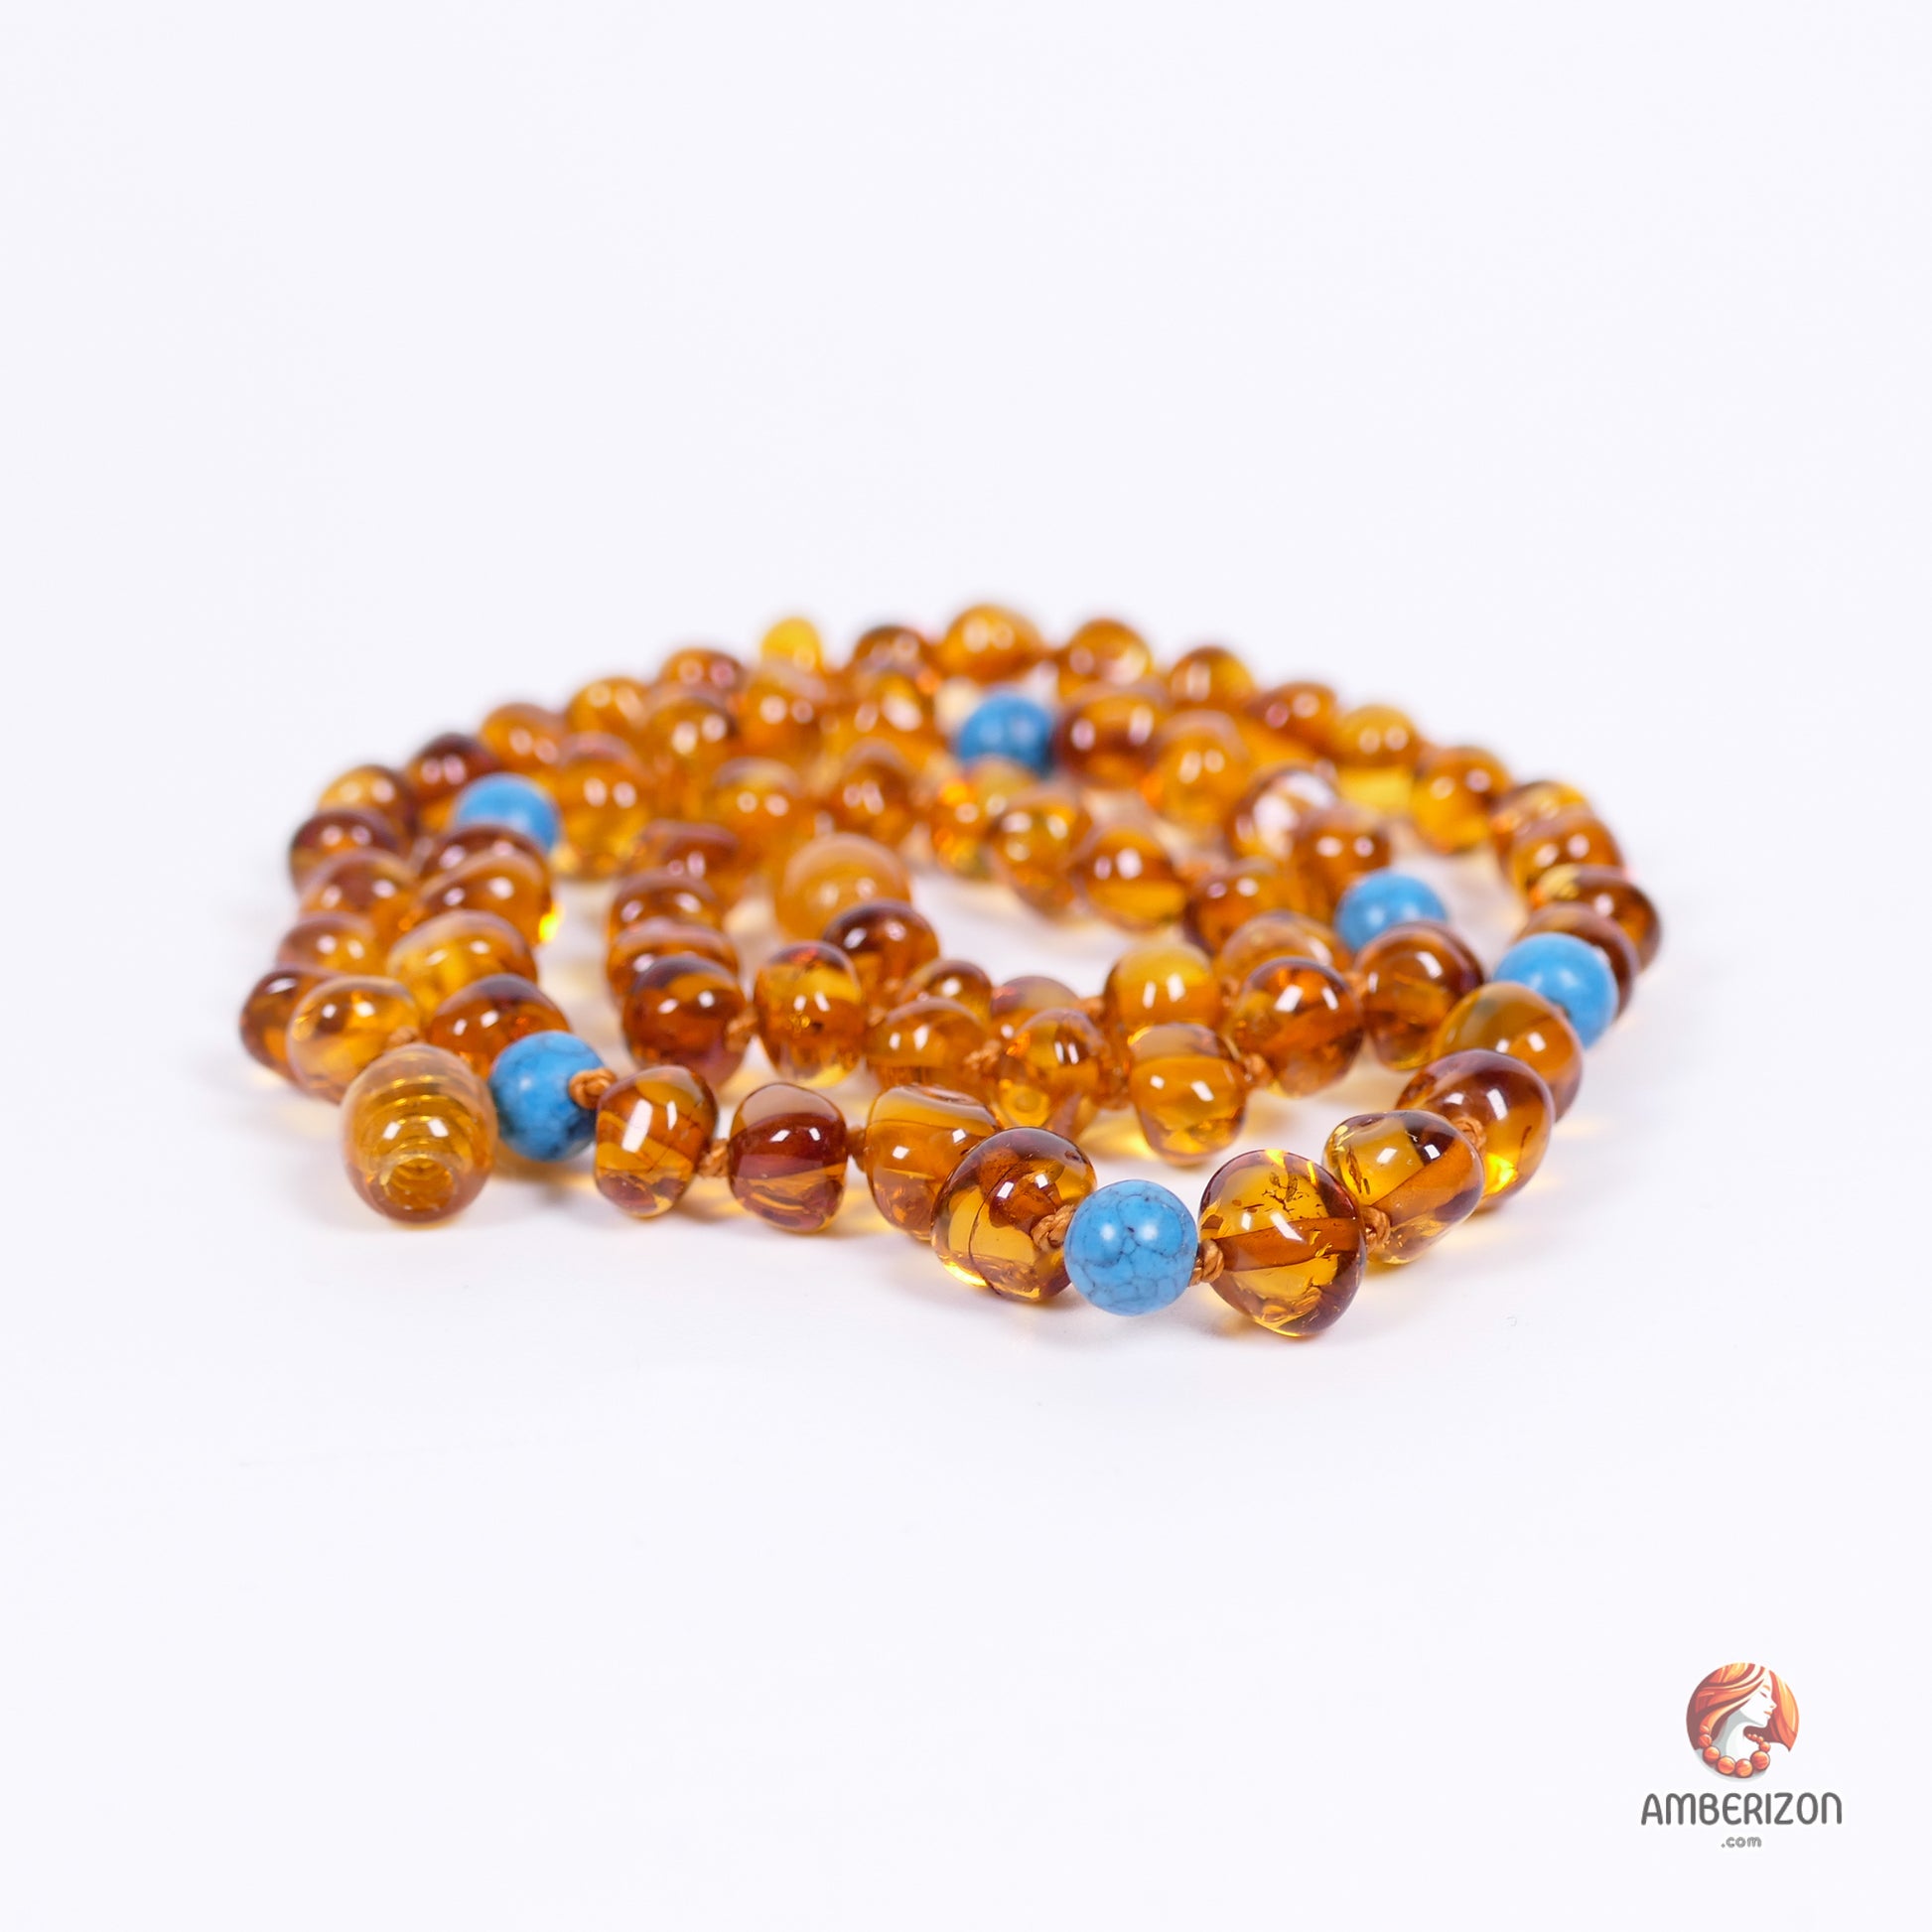 Minimalist Baltic Amber Necklace for Women - Honey & Turquoise Beads - 49cm Length